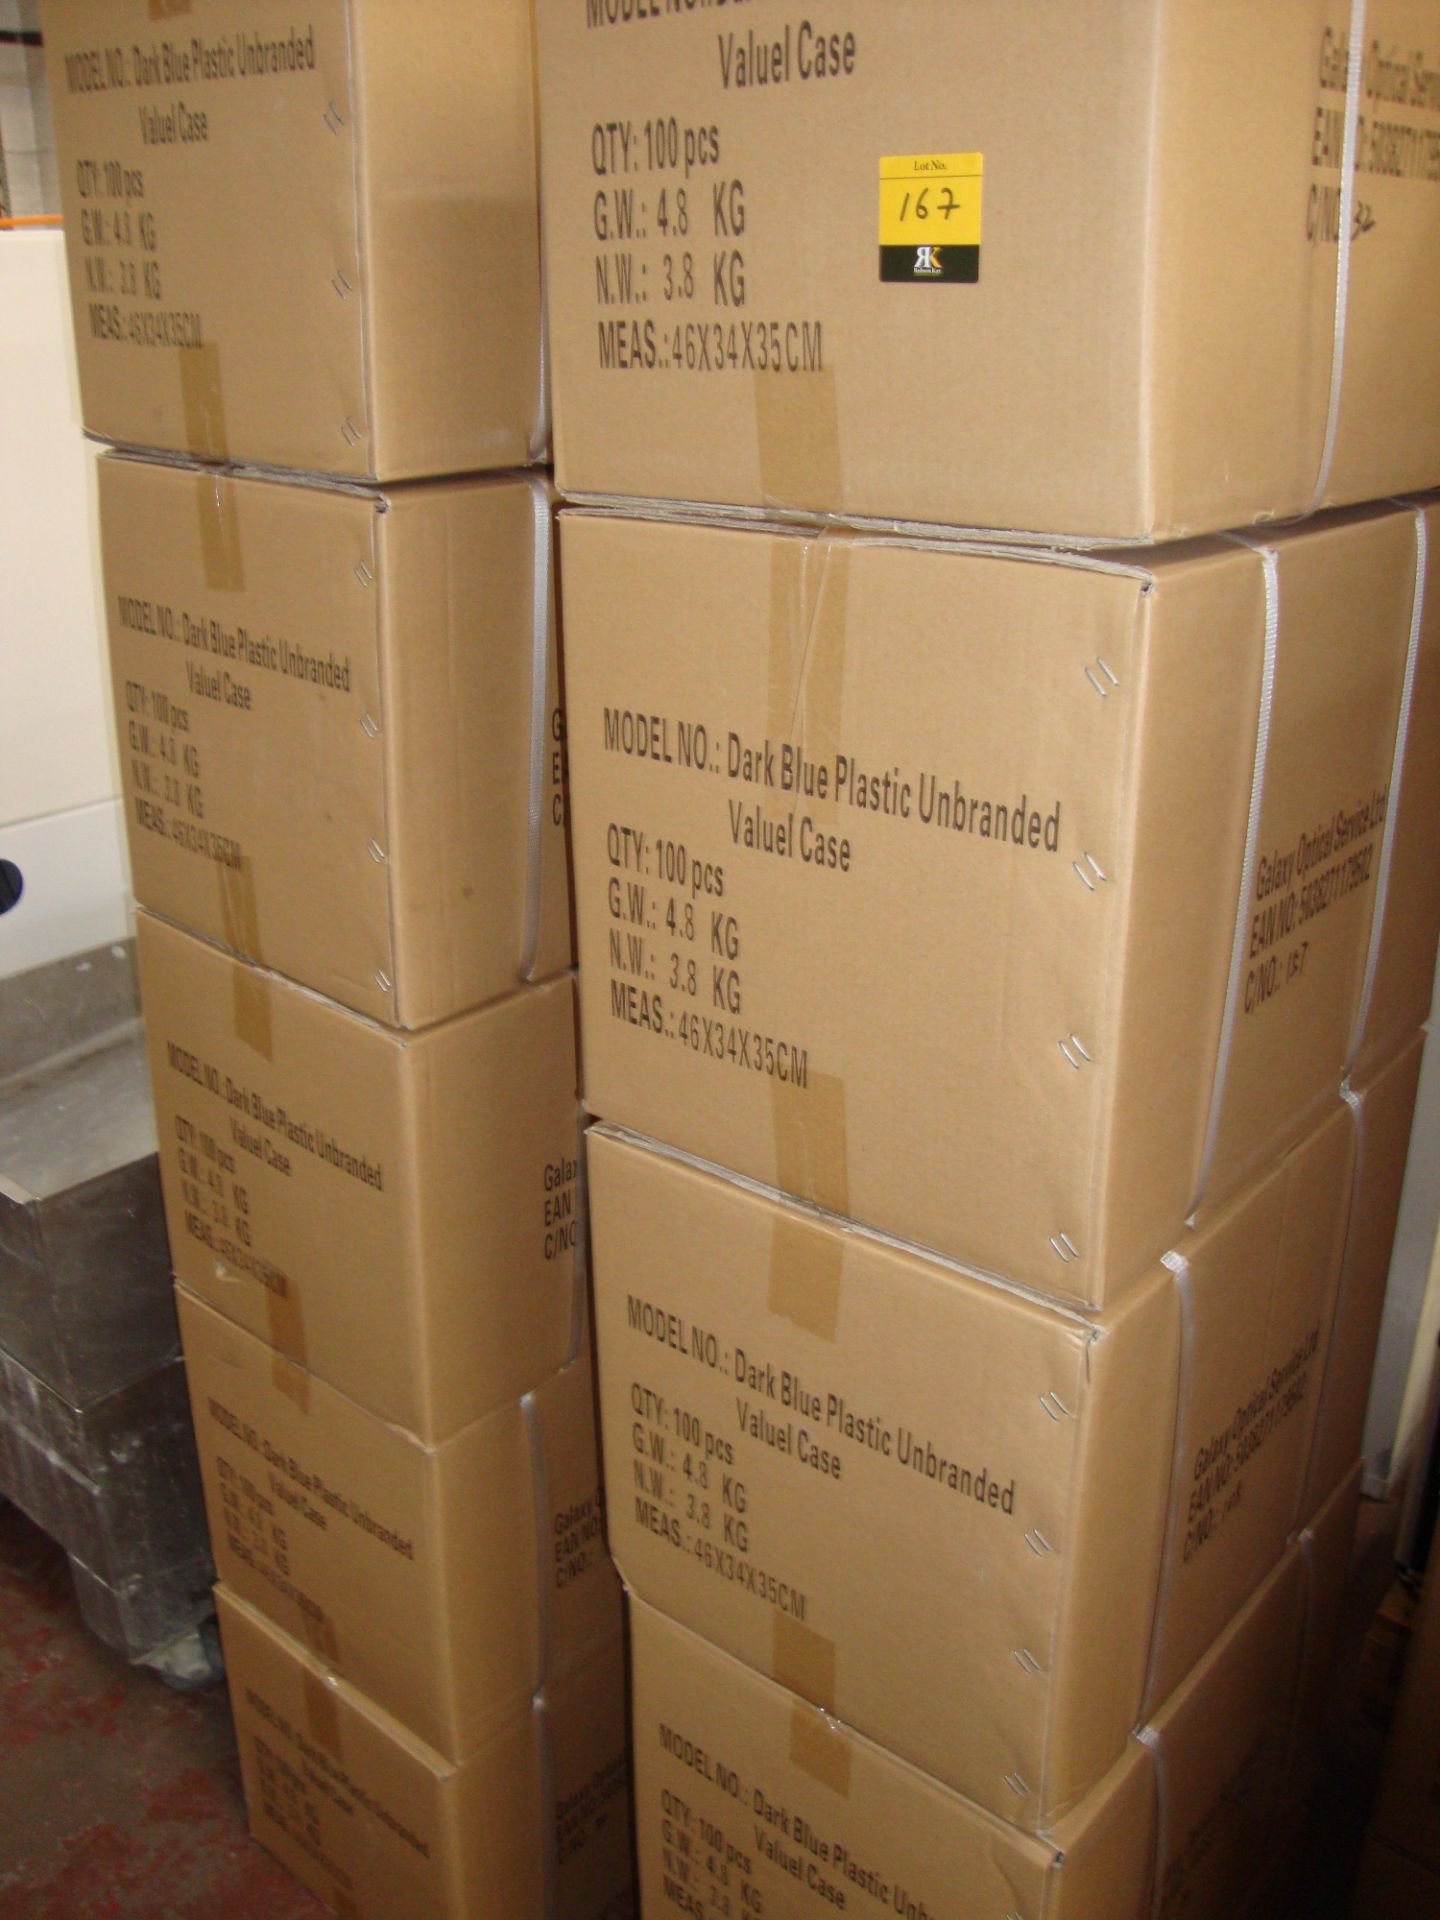 20 boxes containing a total of 2,000 dark blue plastic unbranded glasses/sunglasses cases All the - Image 3 of 3